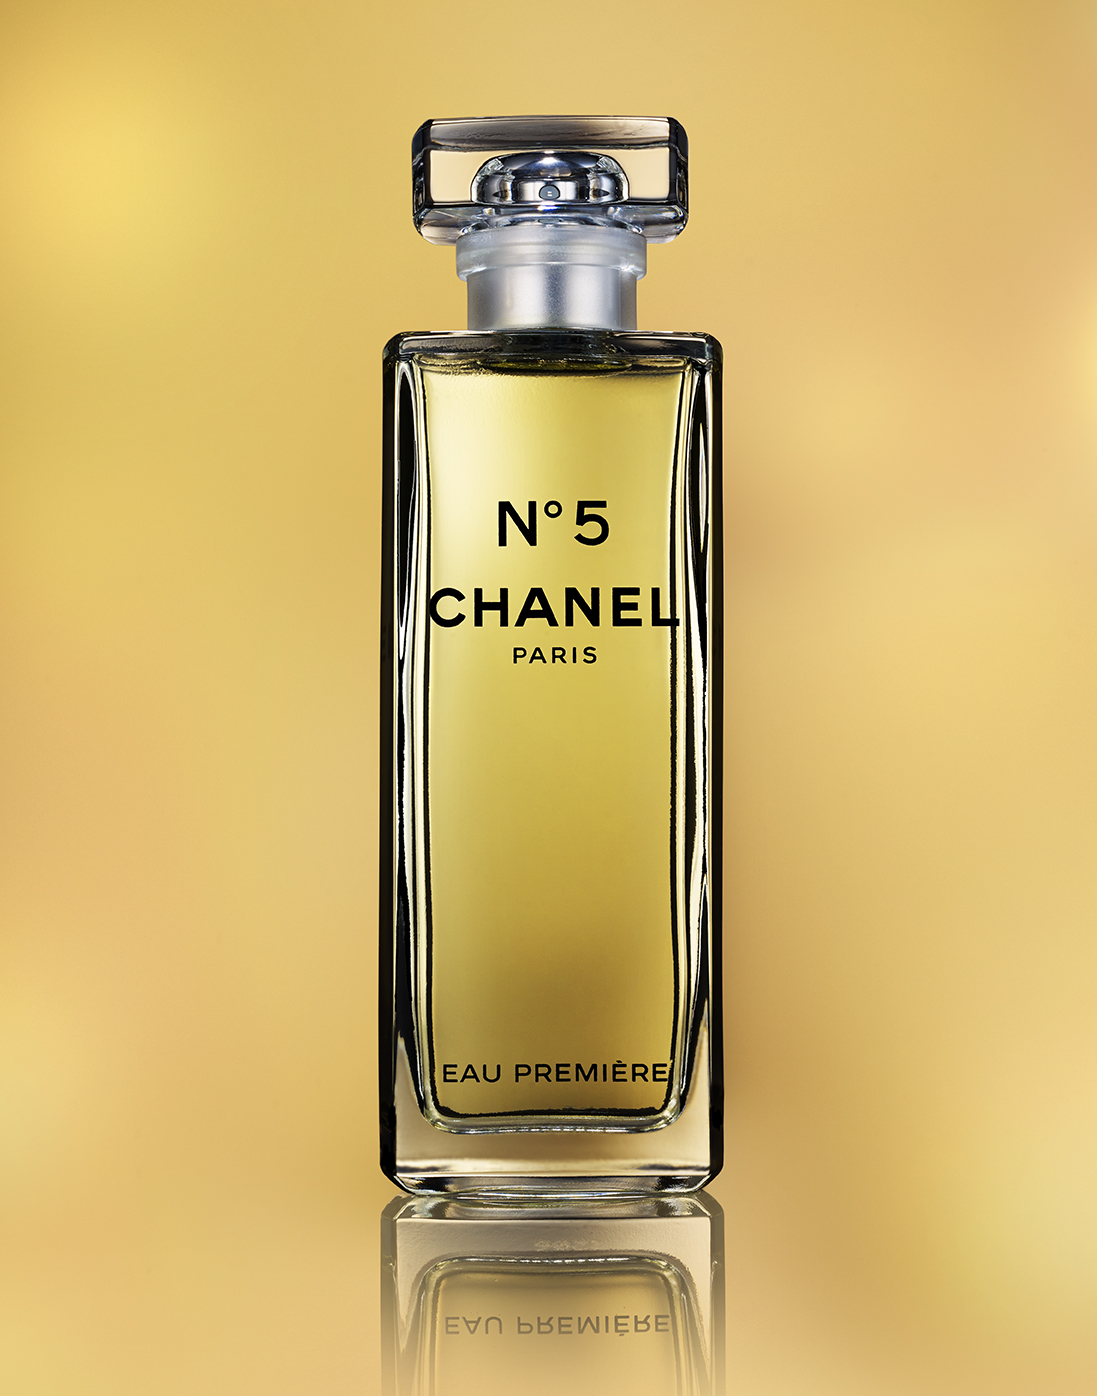 CHANEL NUMBER 5 FIVE ON A GOLDEN BACKGROUND BY DAVID FILIBERTI